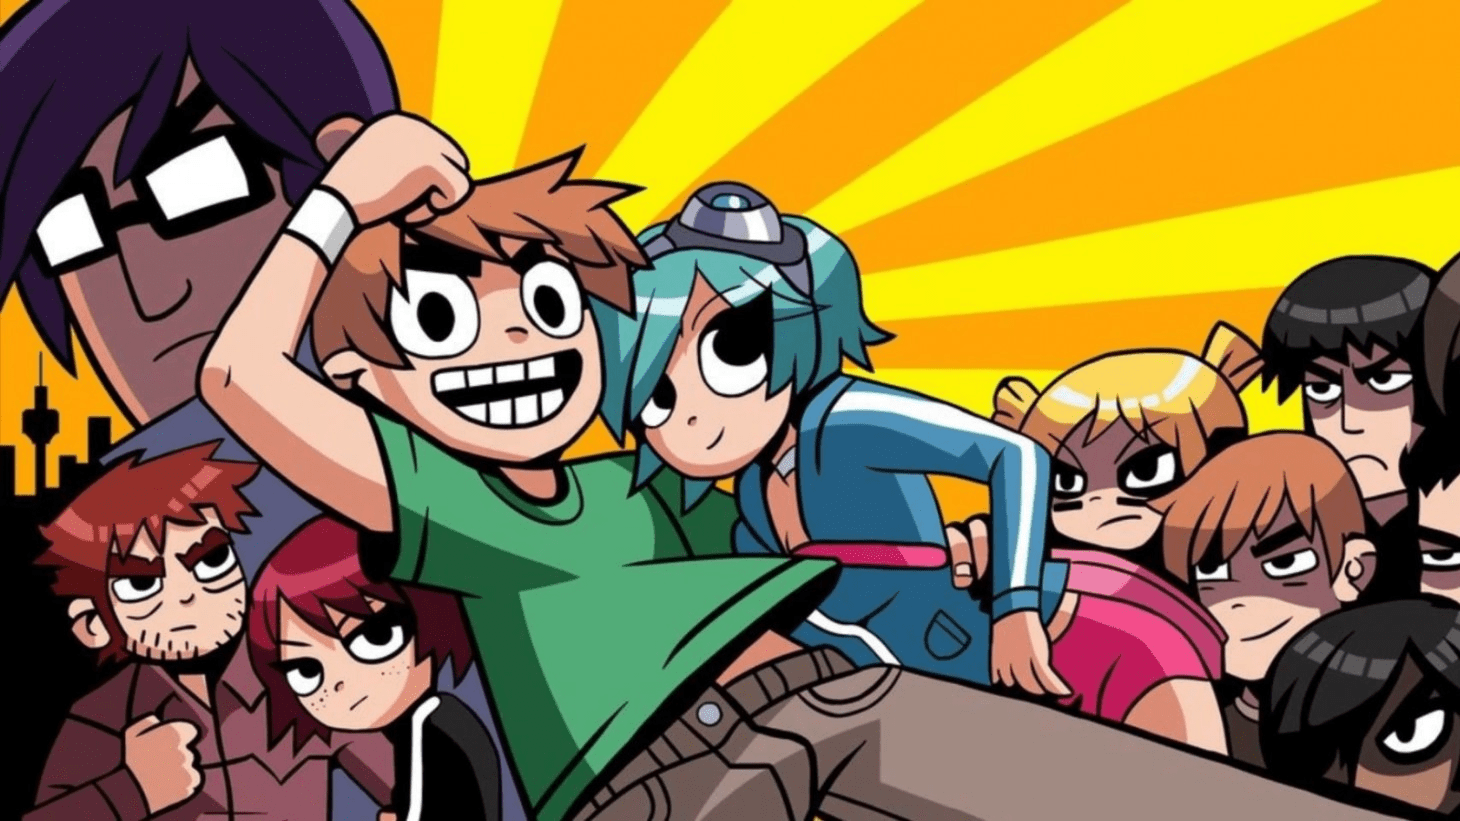 Scott Pilgrim is getting an anime, joining several other Western comics getting the anime treatment!